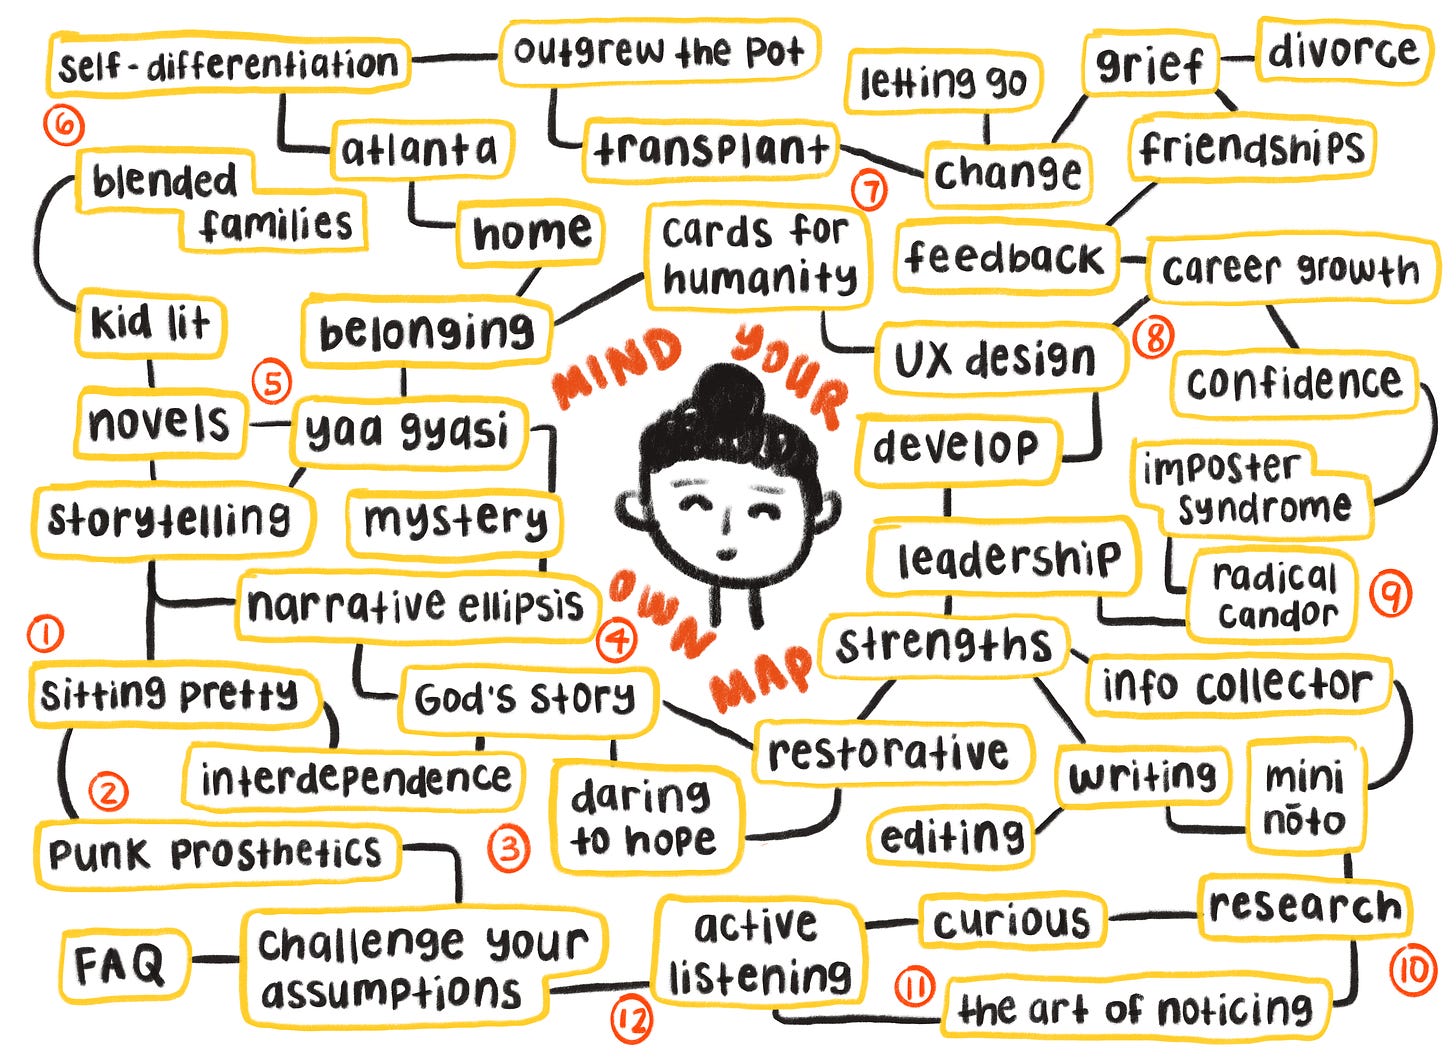 A mind map sketched digitally with word bubbles with topics like "belonging," "self-differentiation," "letting go," "blended families," "storytelling," "sitting pretty," "active listening," "imposter syndrome," and "daring to hope" connecting to each other. A quick sketch of the author's face with "Mind Your Own Map" is drawn in the center of the map.